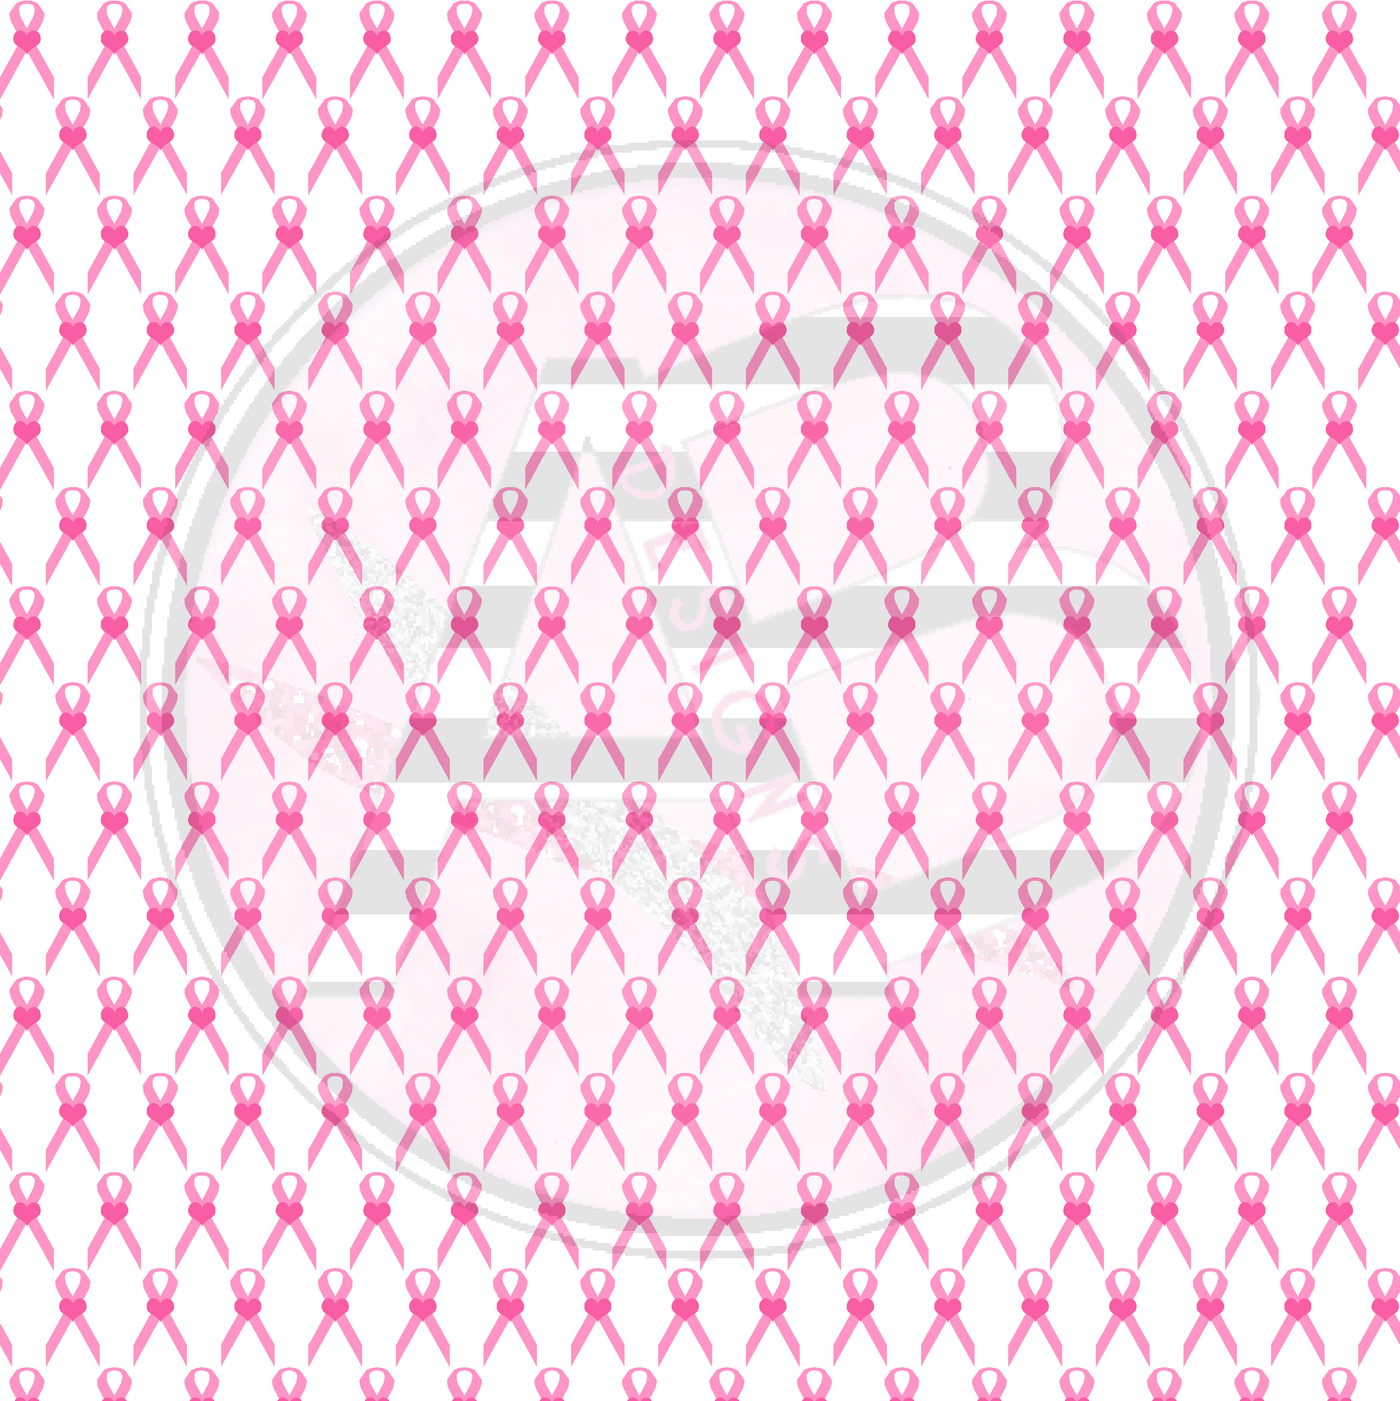 Adhesive Patterned Vinyl - Breast Cancer 3